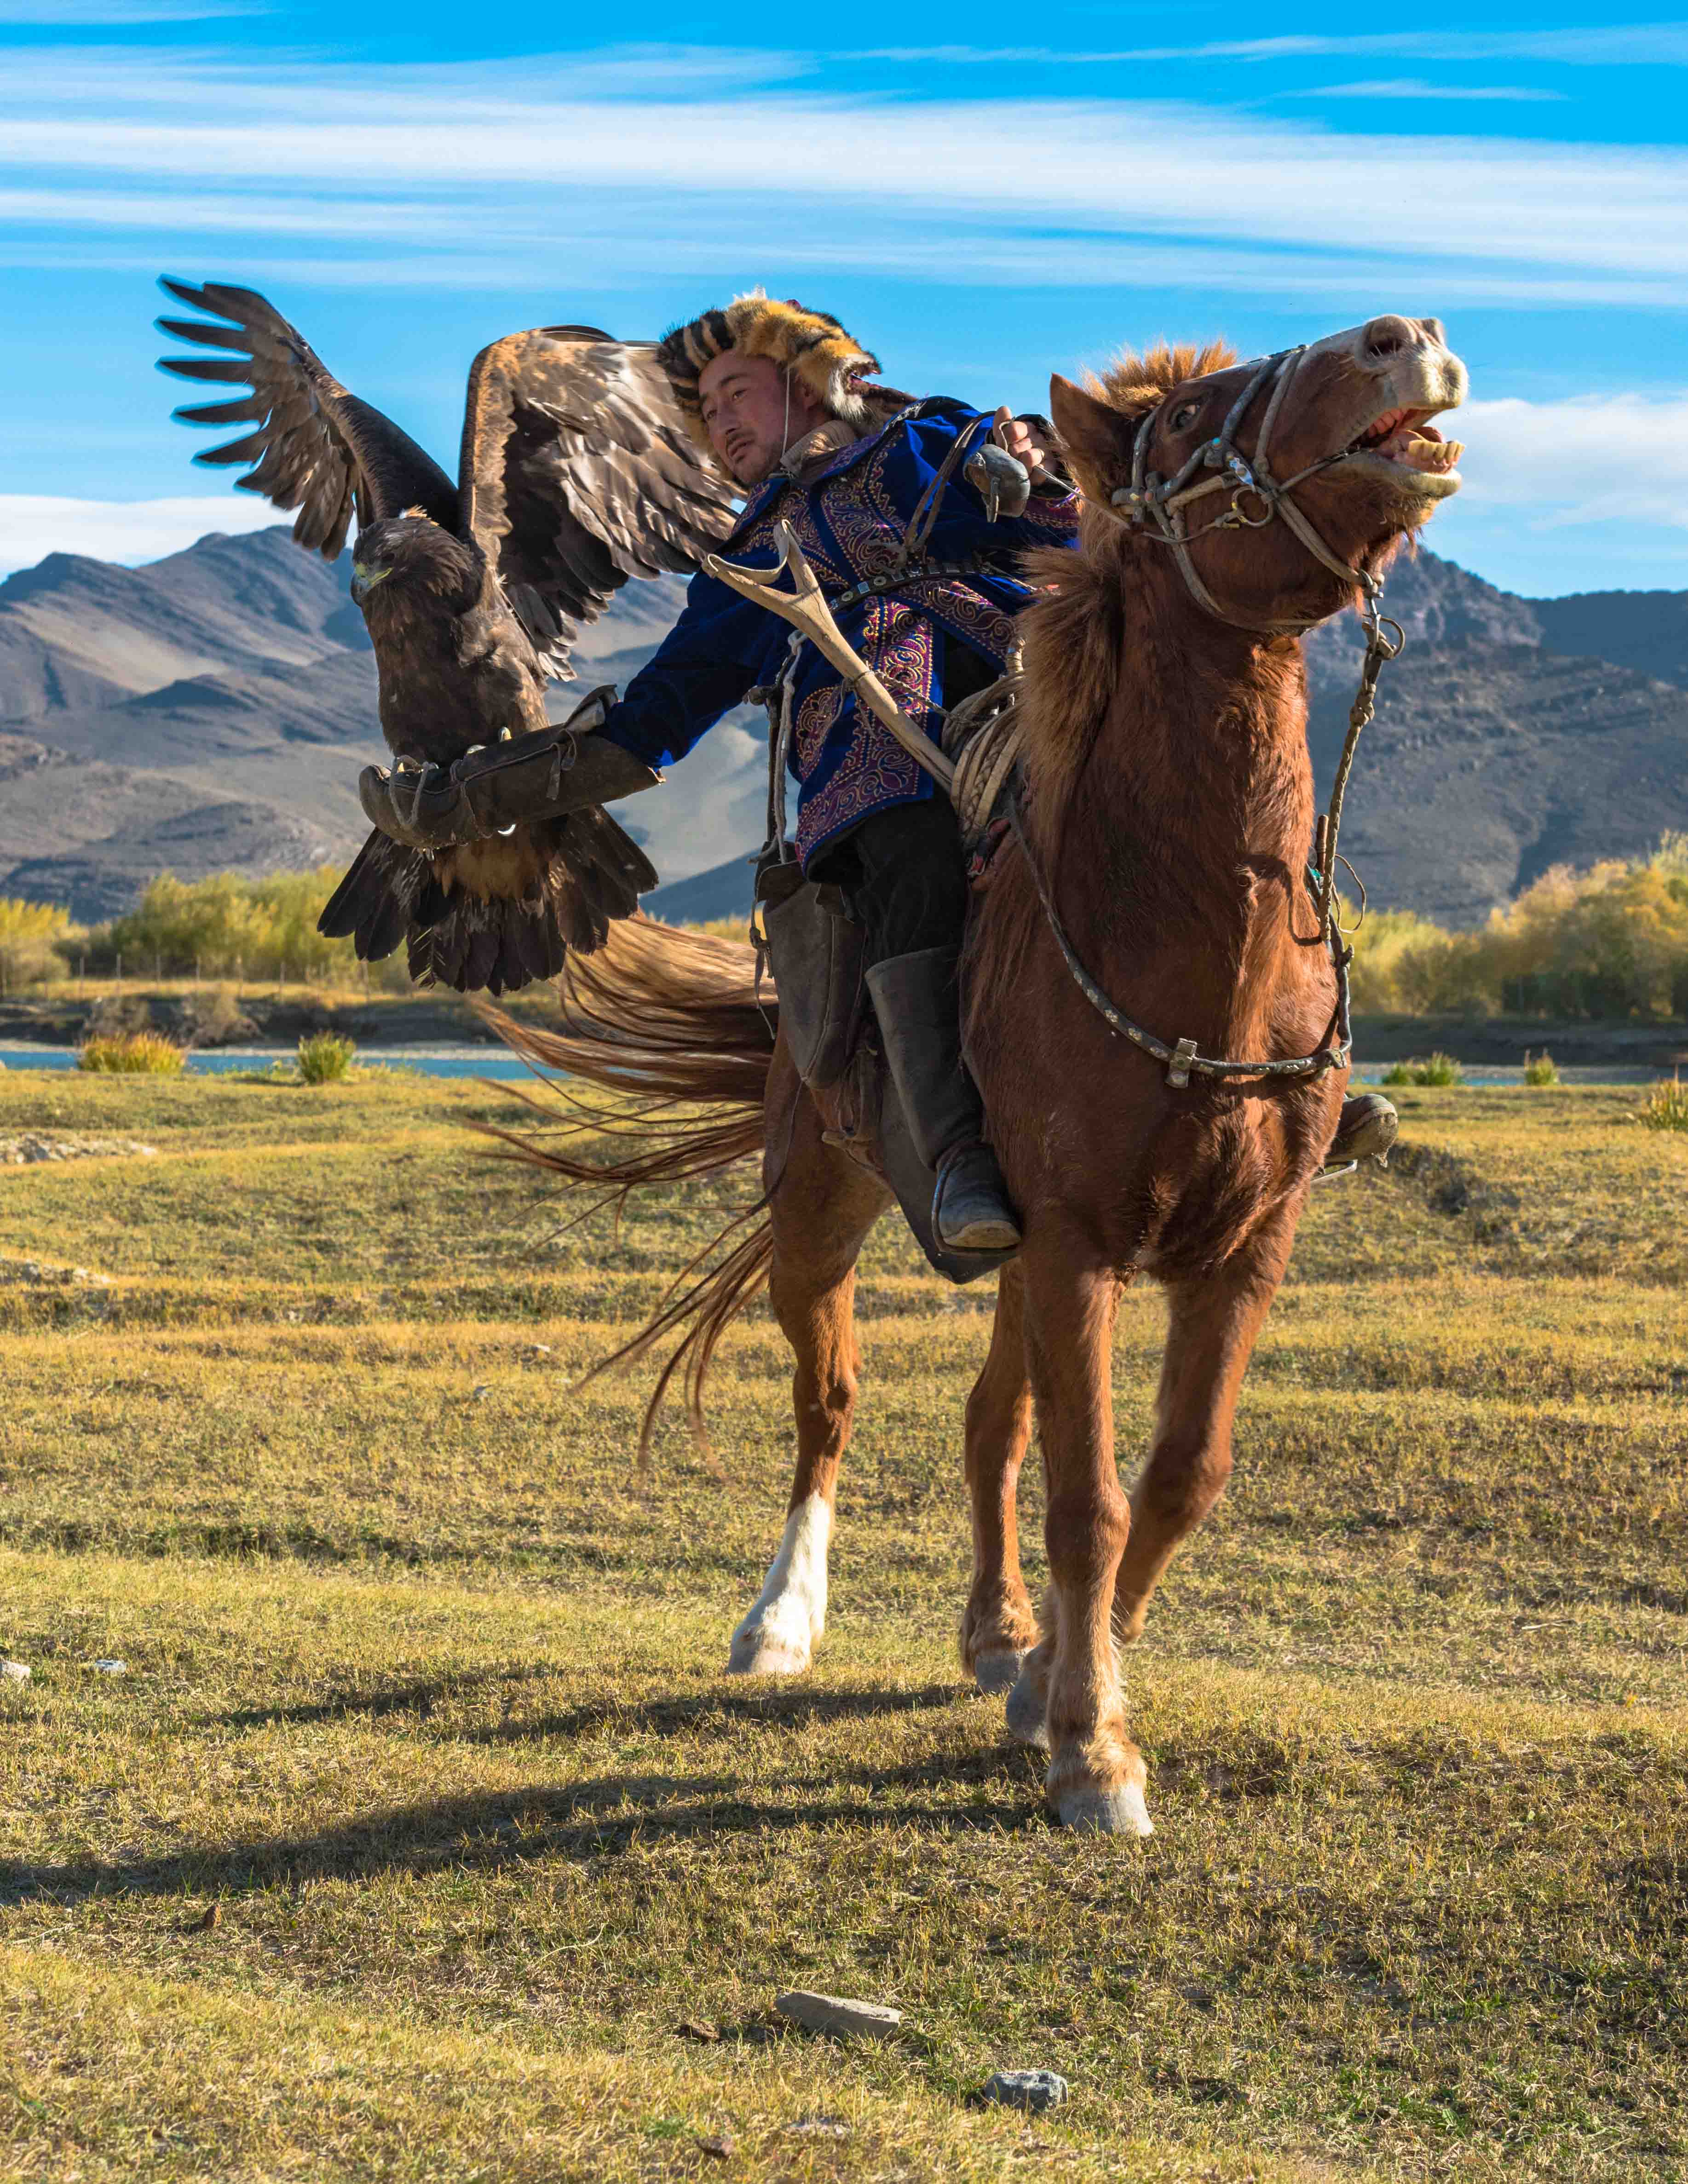 A Golden Eagle hunter catches his eagle while on horseback, one of the many events and competitions that take place at the Golden Eagle Festival.